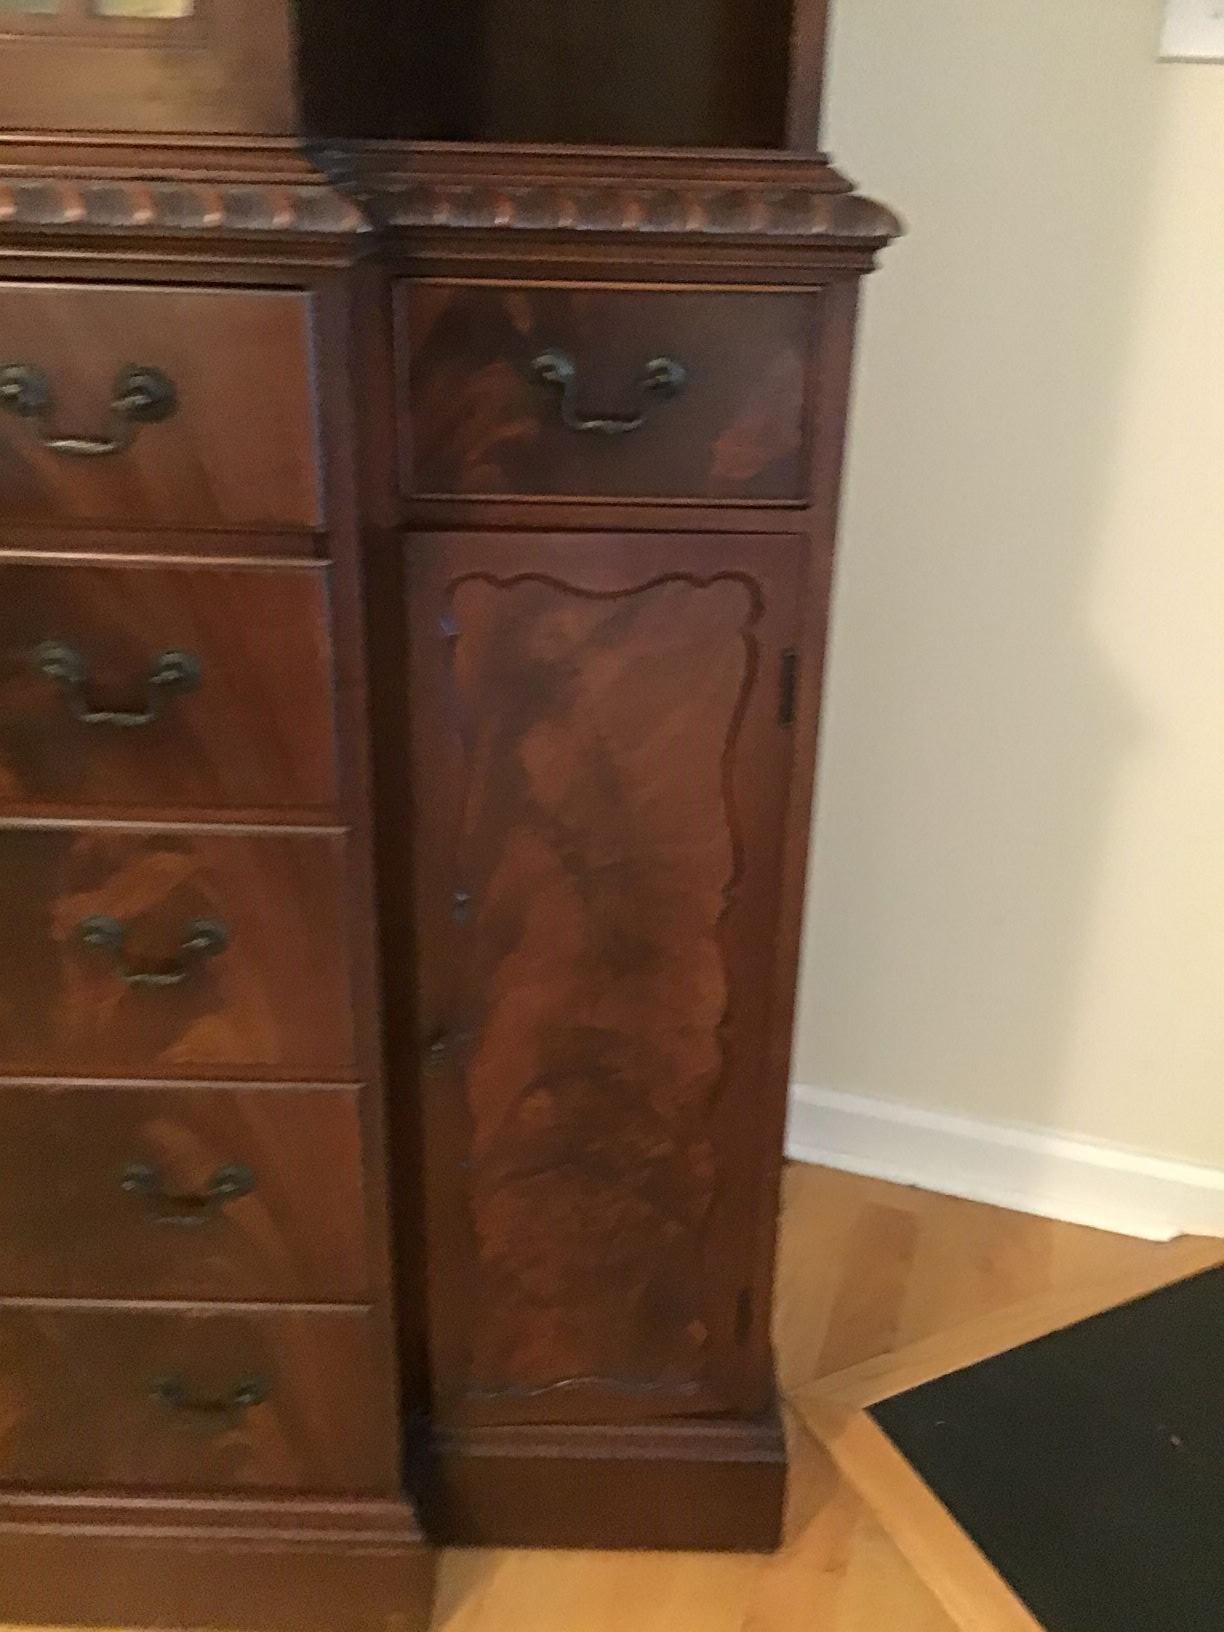 Antique Warsaw Furniture Company Breakfront/China Cabinet